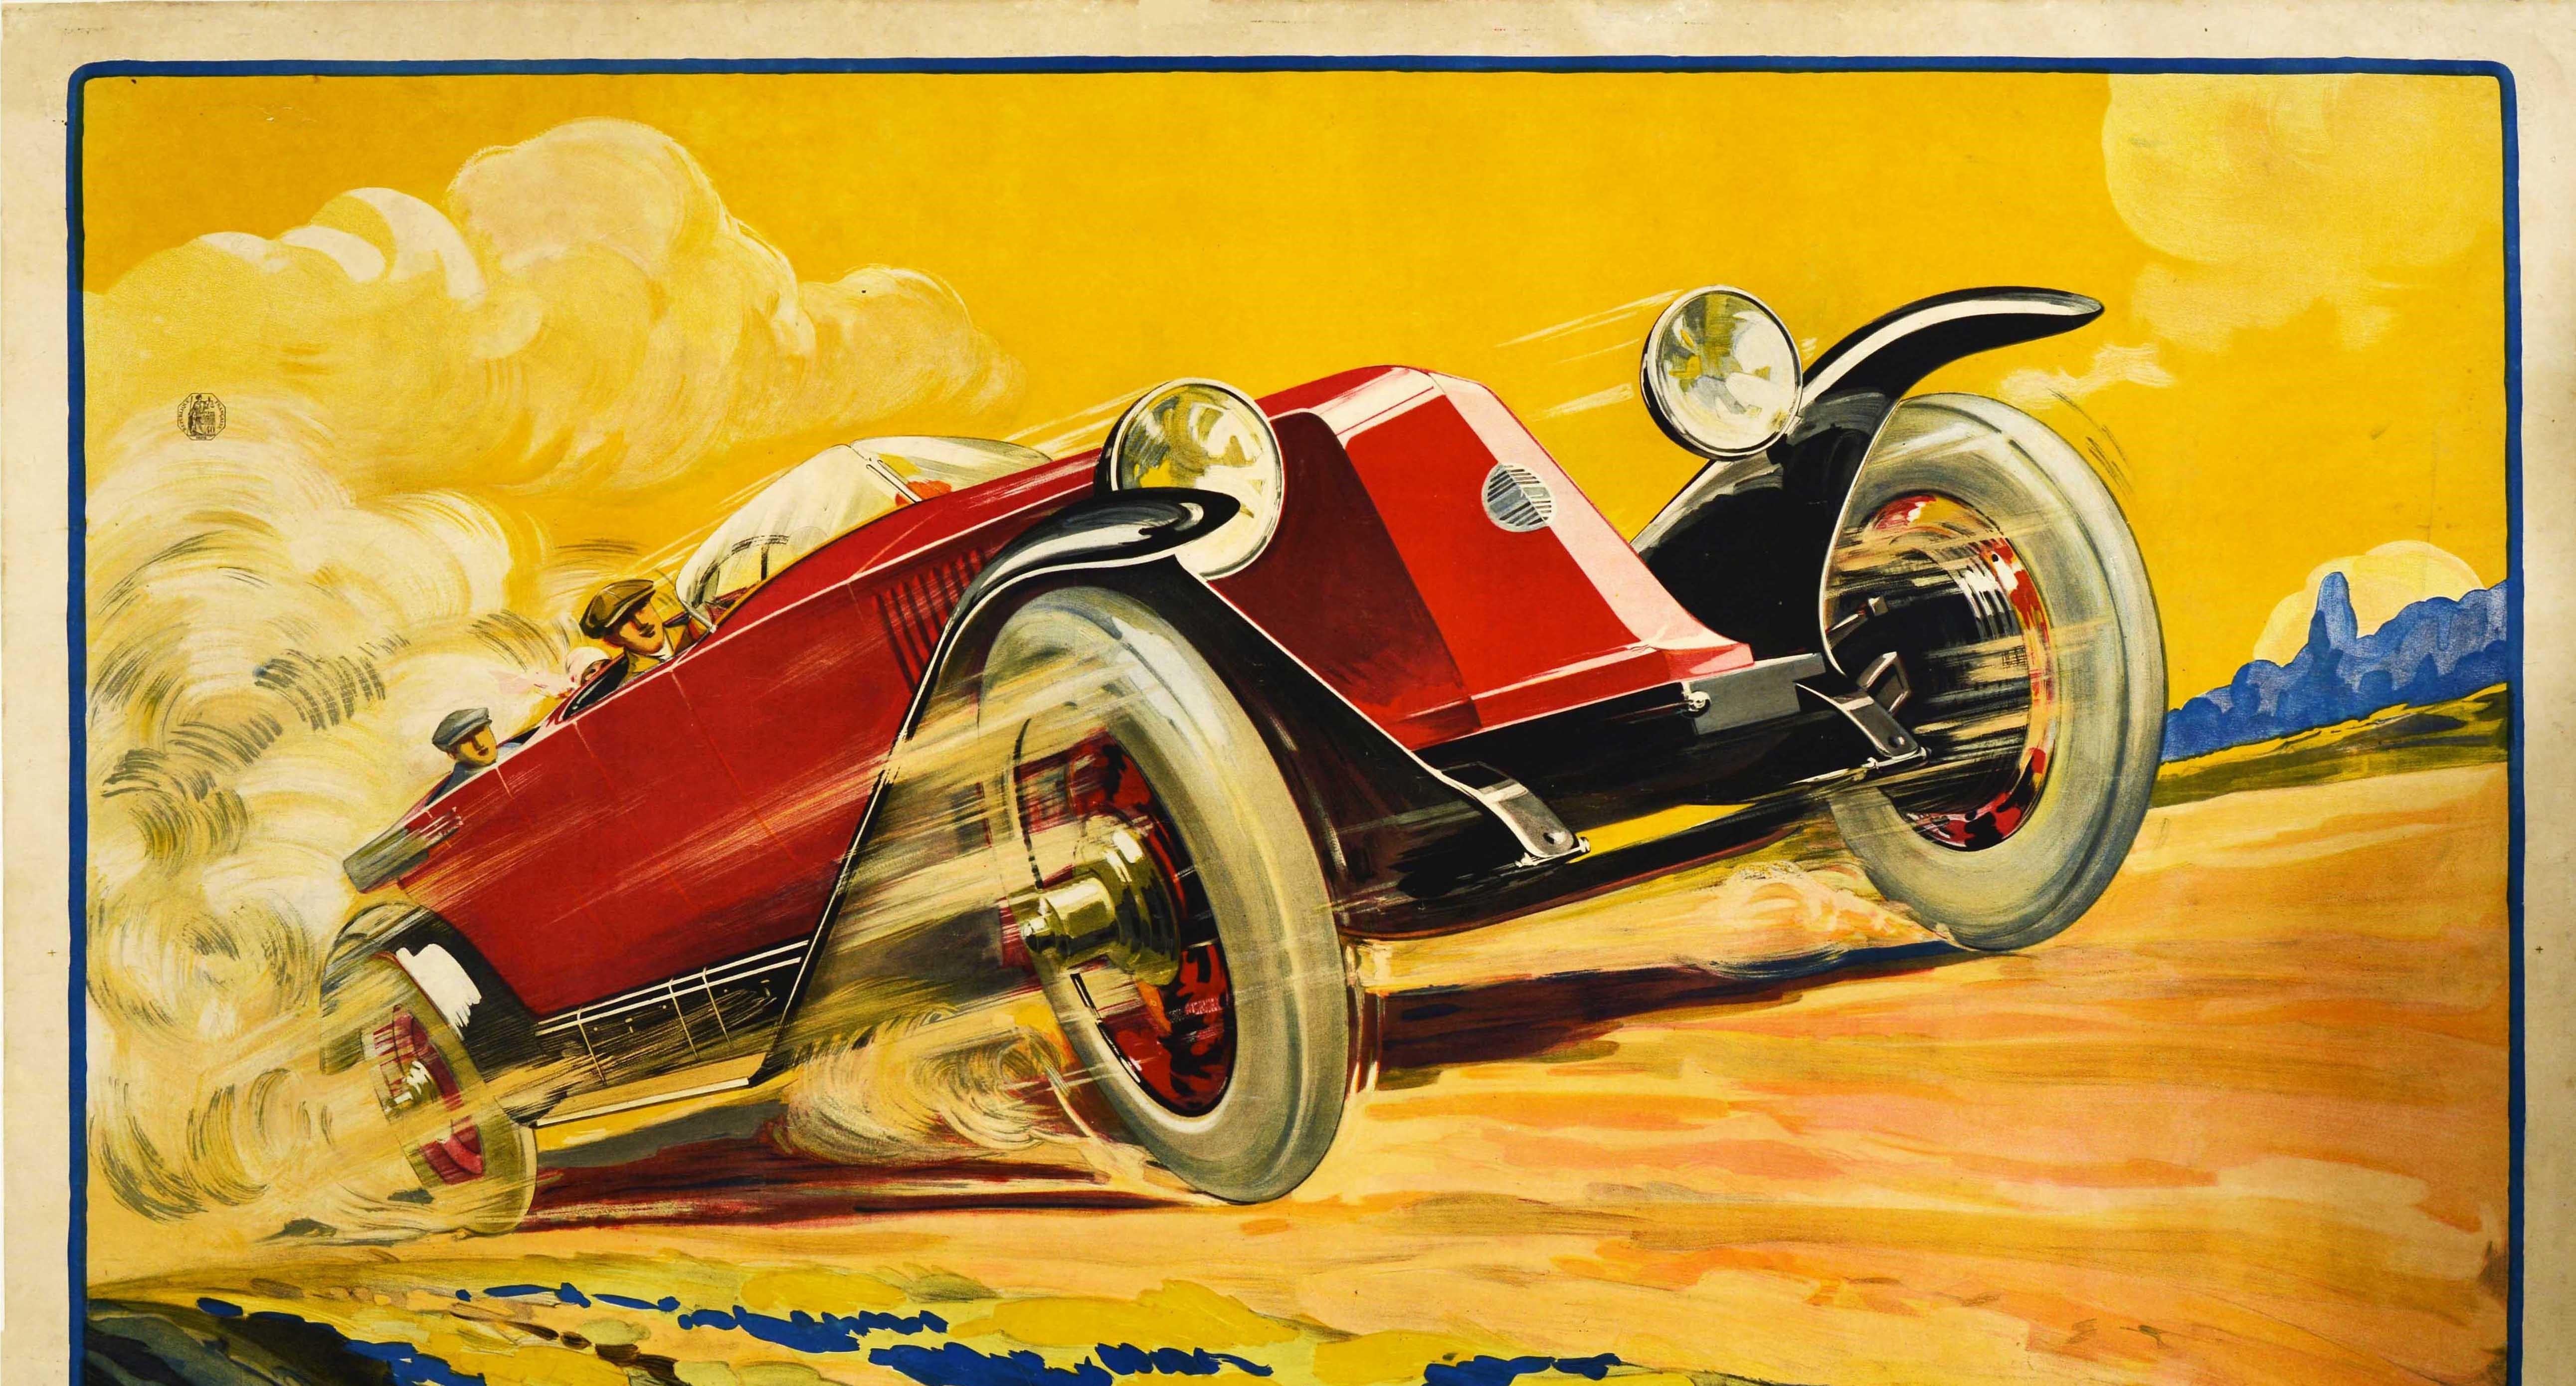 Original antique advertising poster for the French car manufacturer Renault (founded 1899) featuring a stunning Art Deco design showing a classic Type 45 red convertible driving at speed along a country road with the bold yellow company name below.